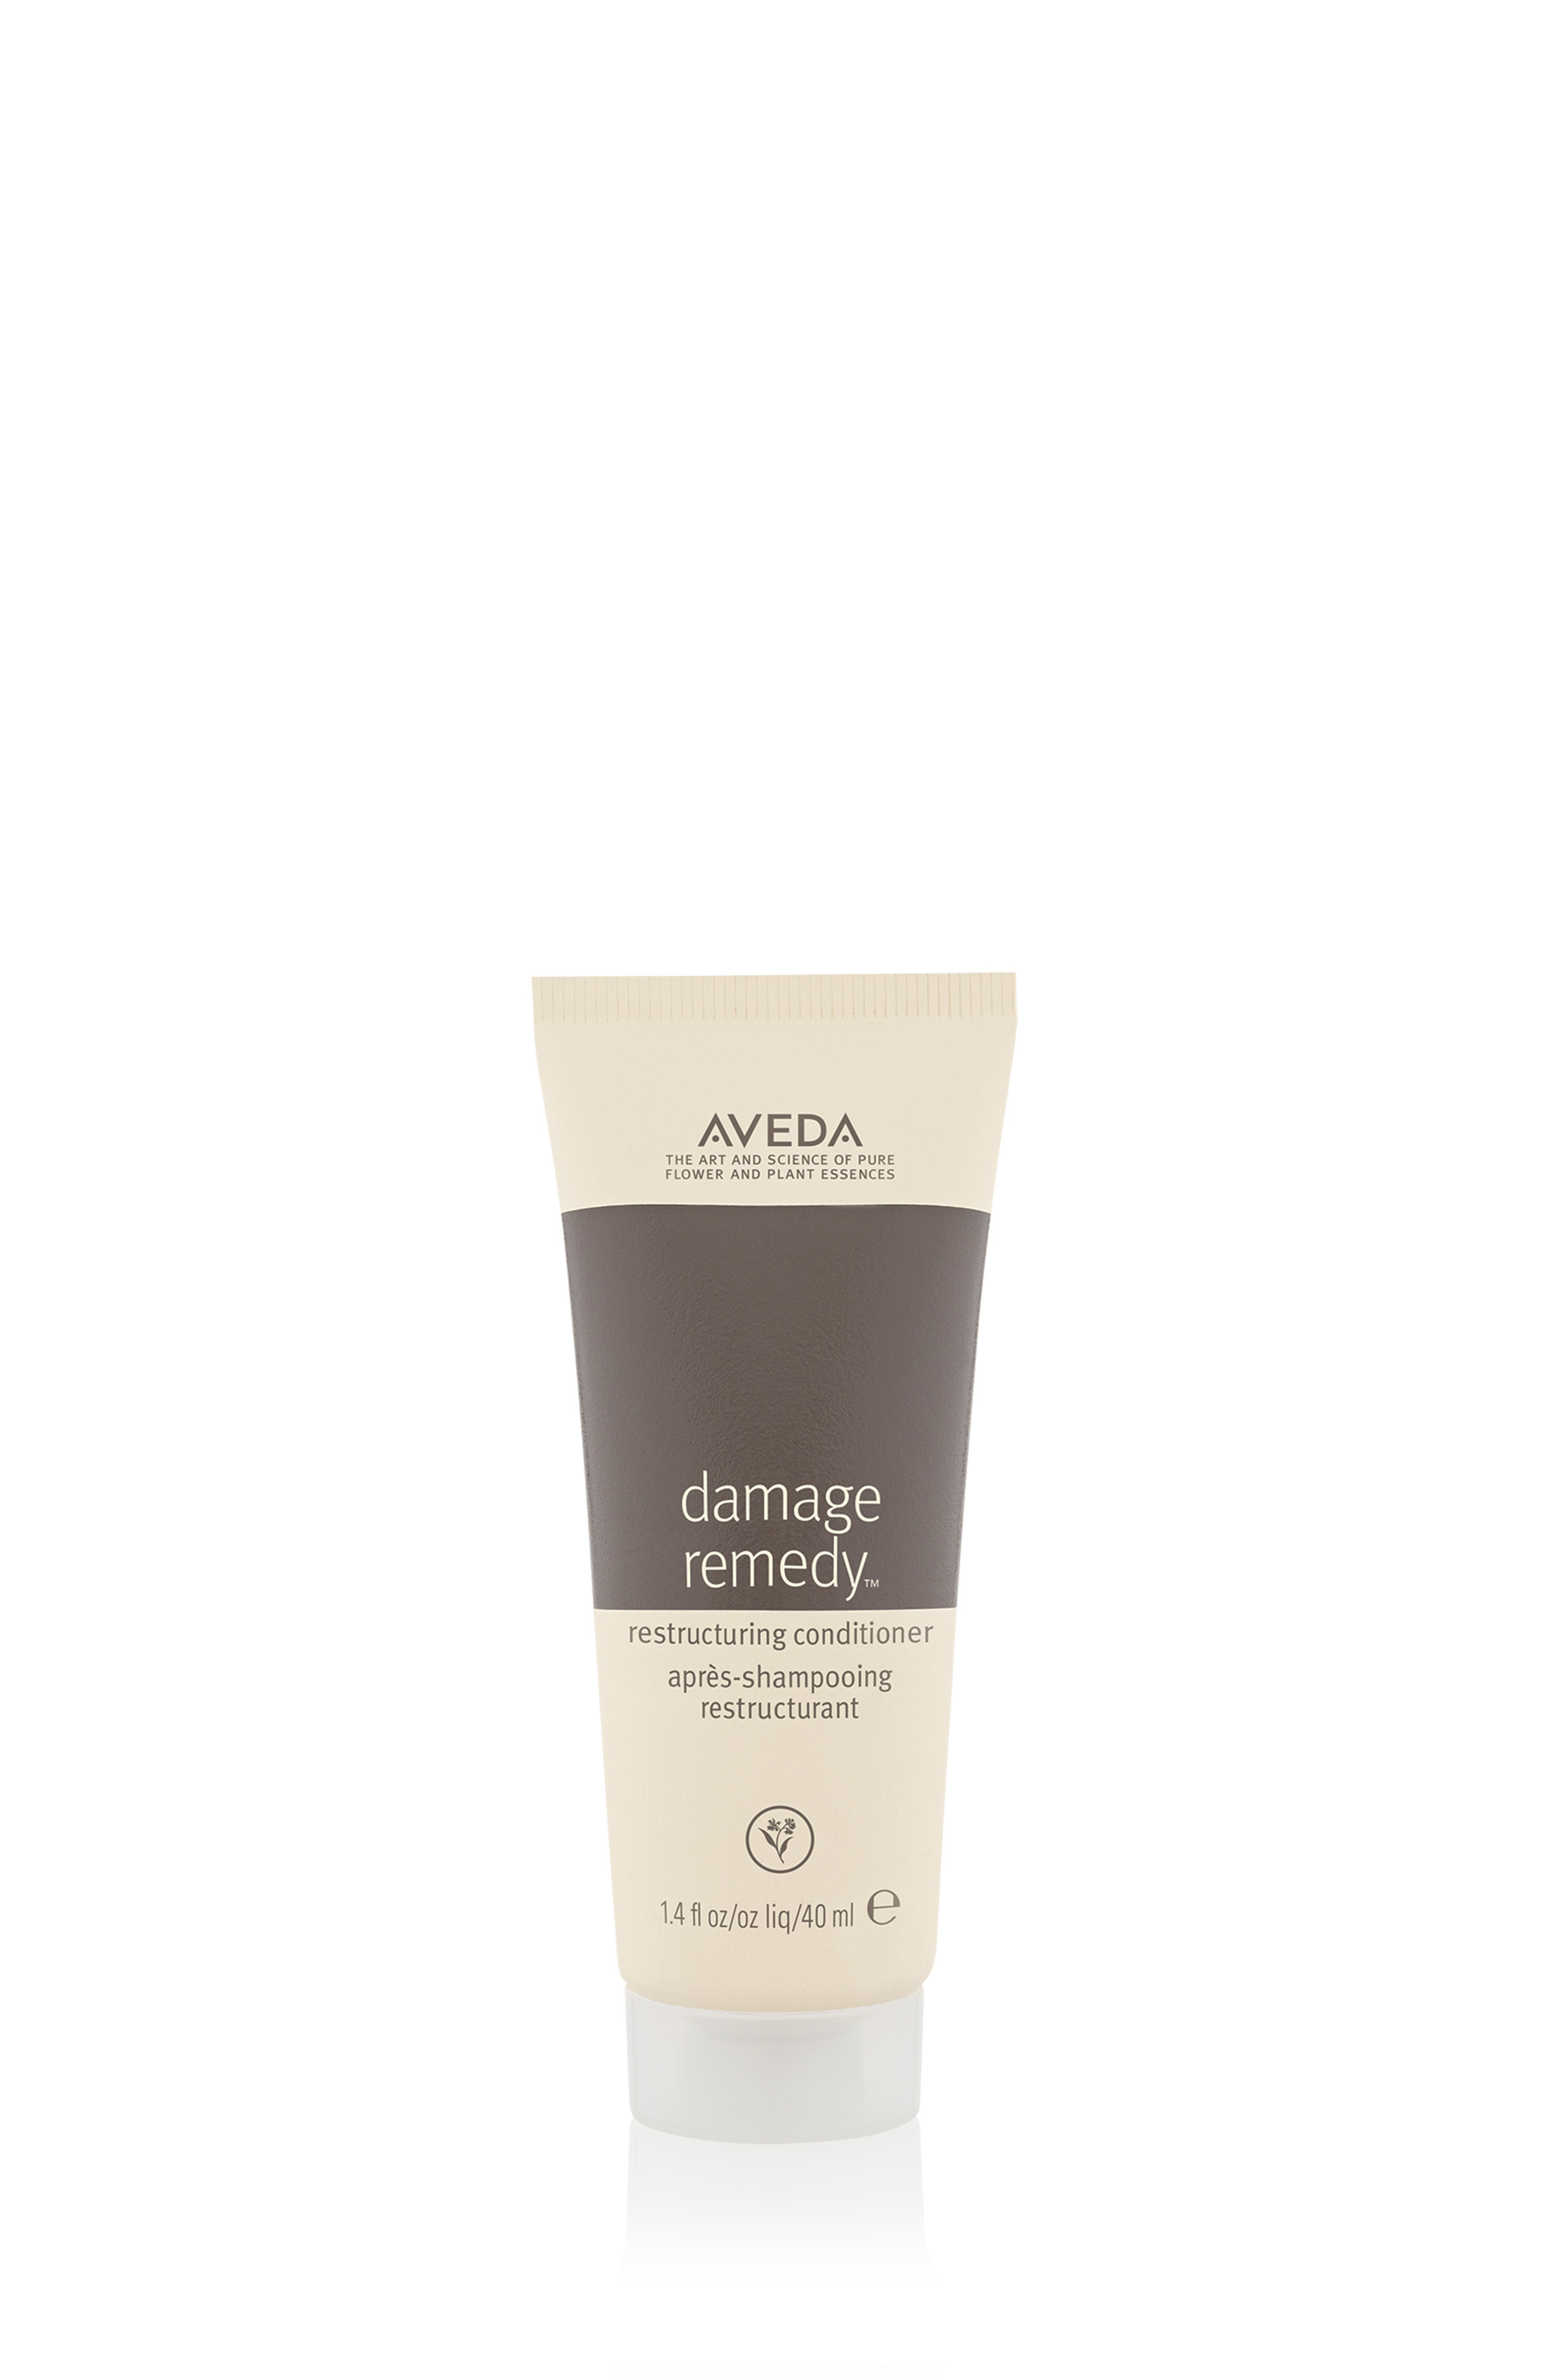 Aveda damage remedy conditioner 40 ml, White / Brown, large image number 0